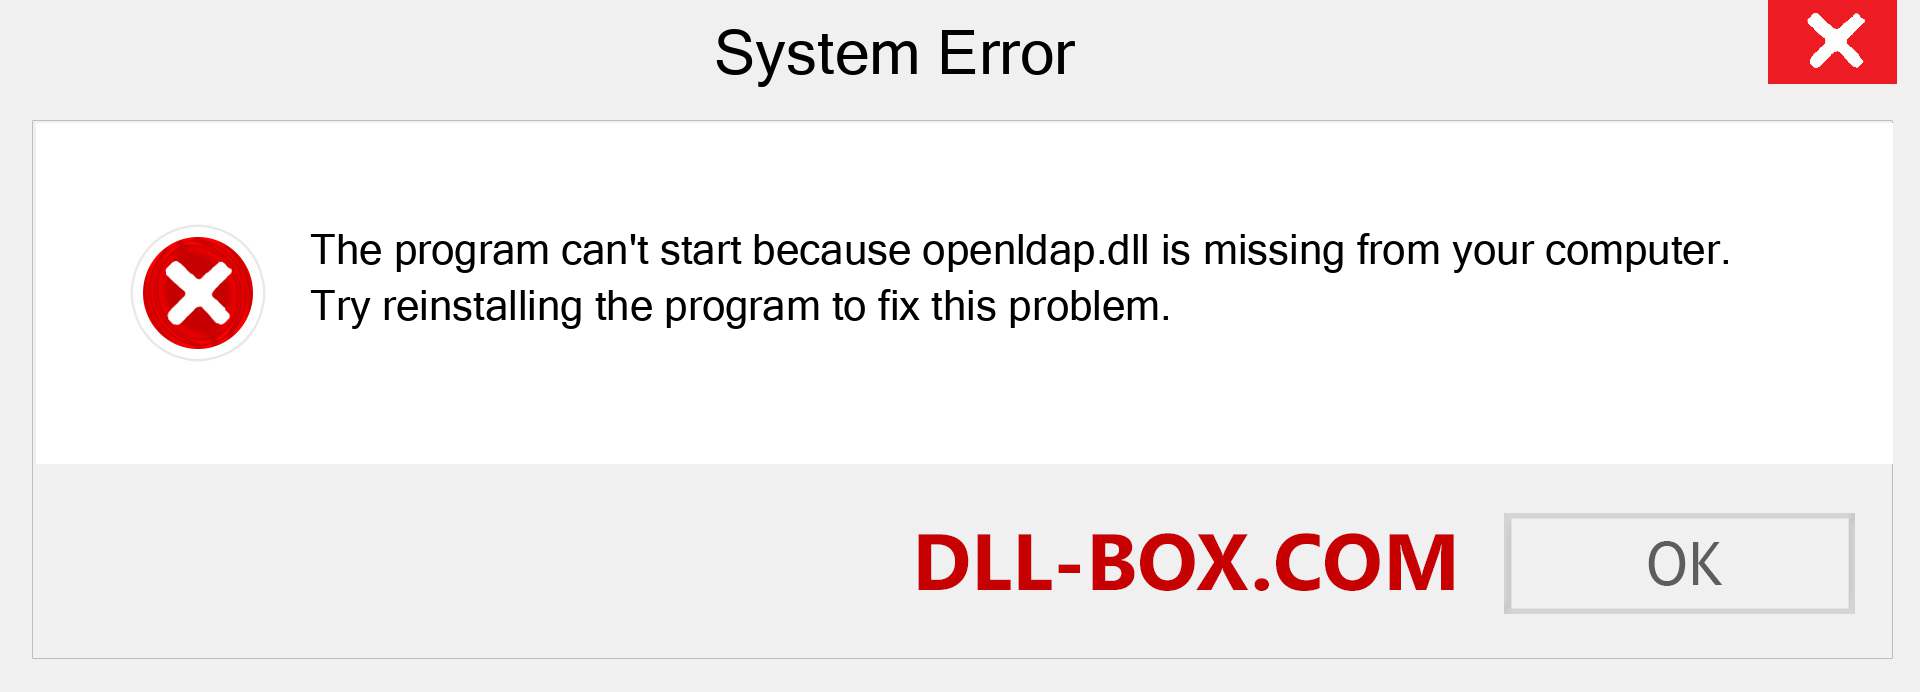  openldap.dll file is missing?. Download for Windows 7, 8, 10 - Fix  openldap dll Missing Error on Windows, photos, images